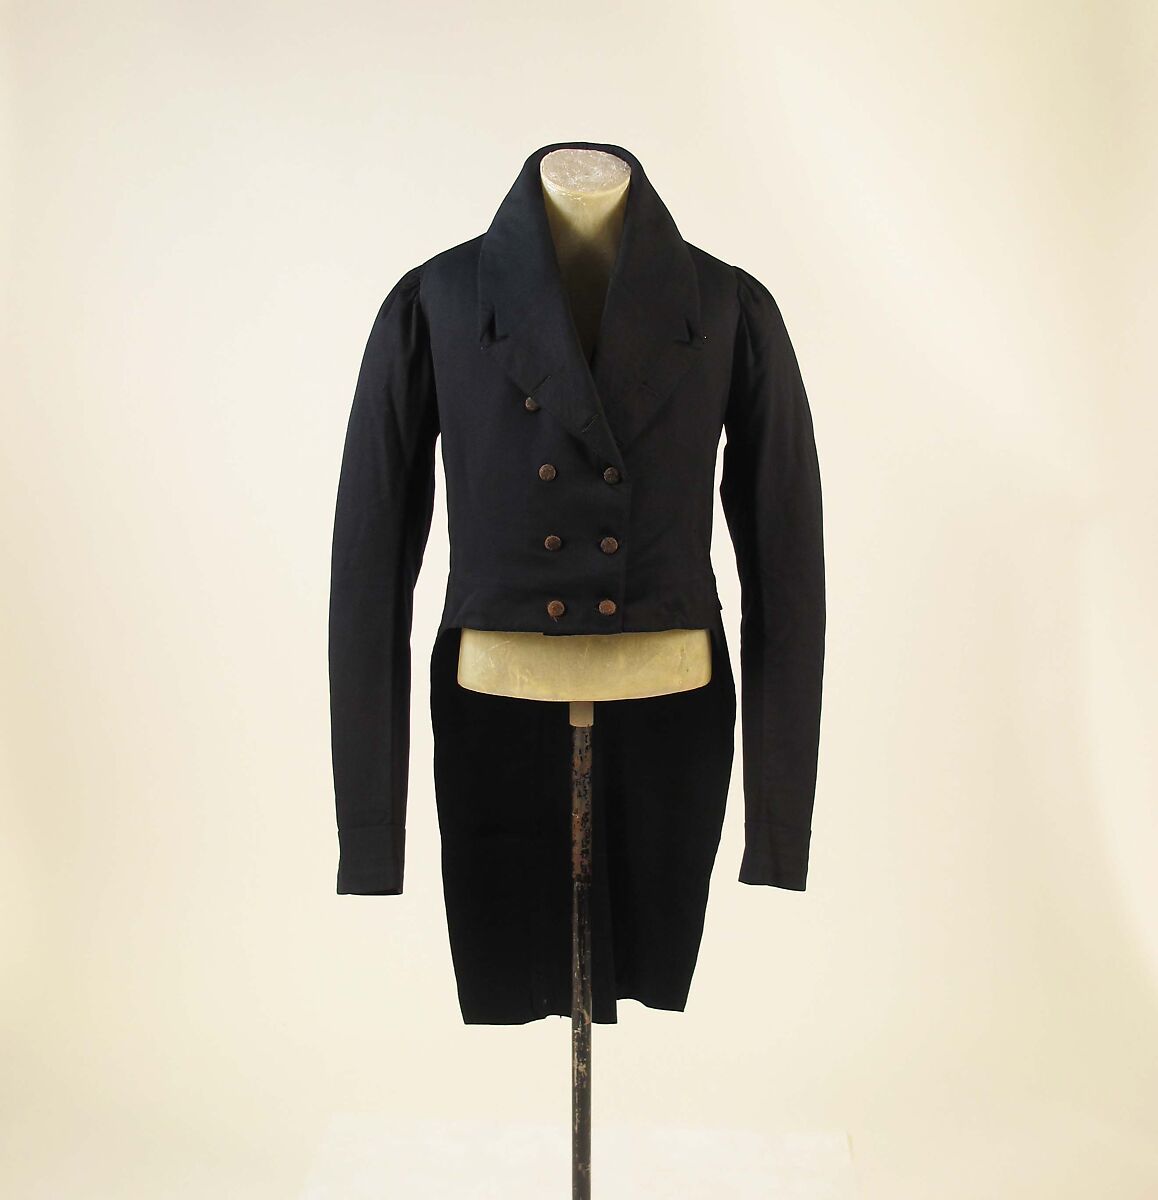 Tailcoat | probably British | The Metropolitan Museum of Art